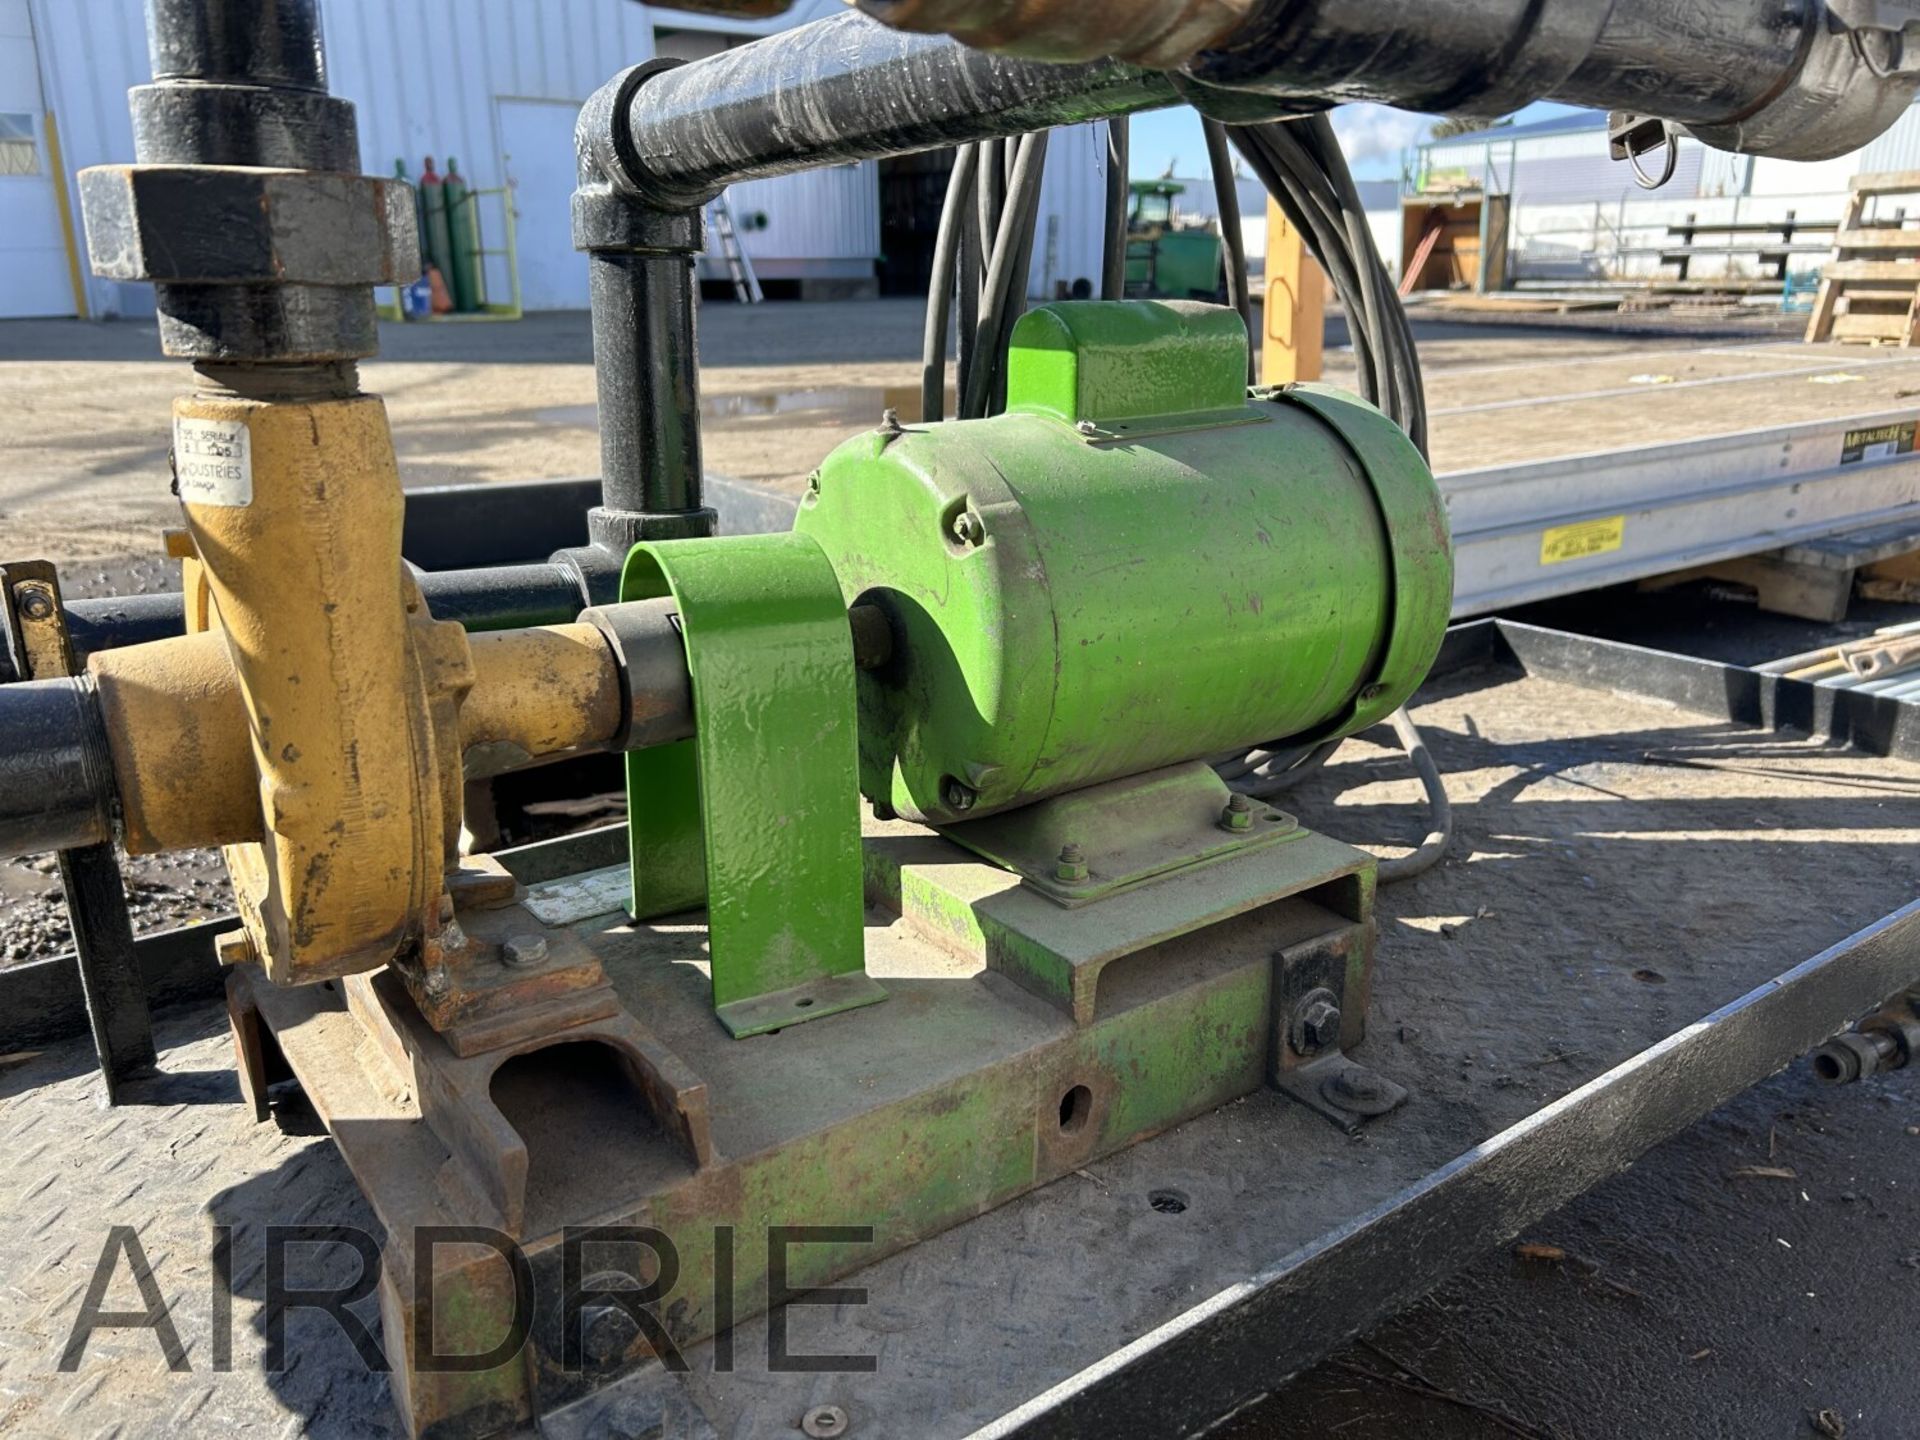 *OFFSITE* BENNET & EMMOTT 2" WATER PUMP & ELECTRIC MOTOR 3PH x 230V W/2" MANIFOLD - Image 3 of 11